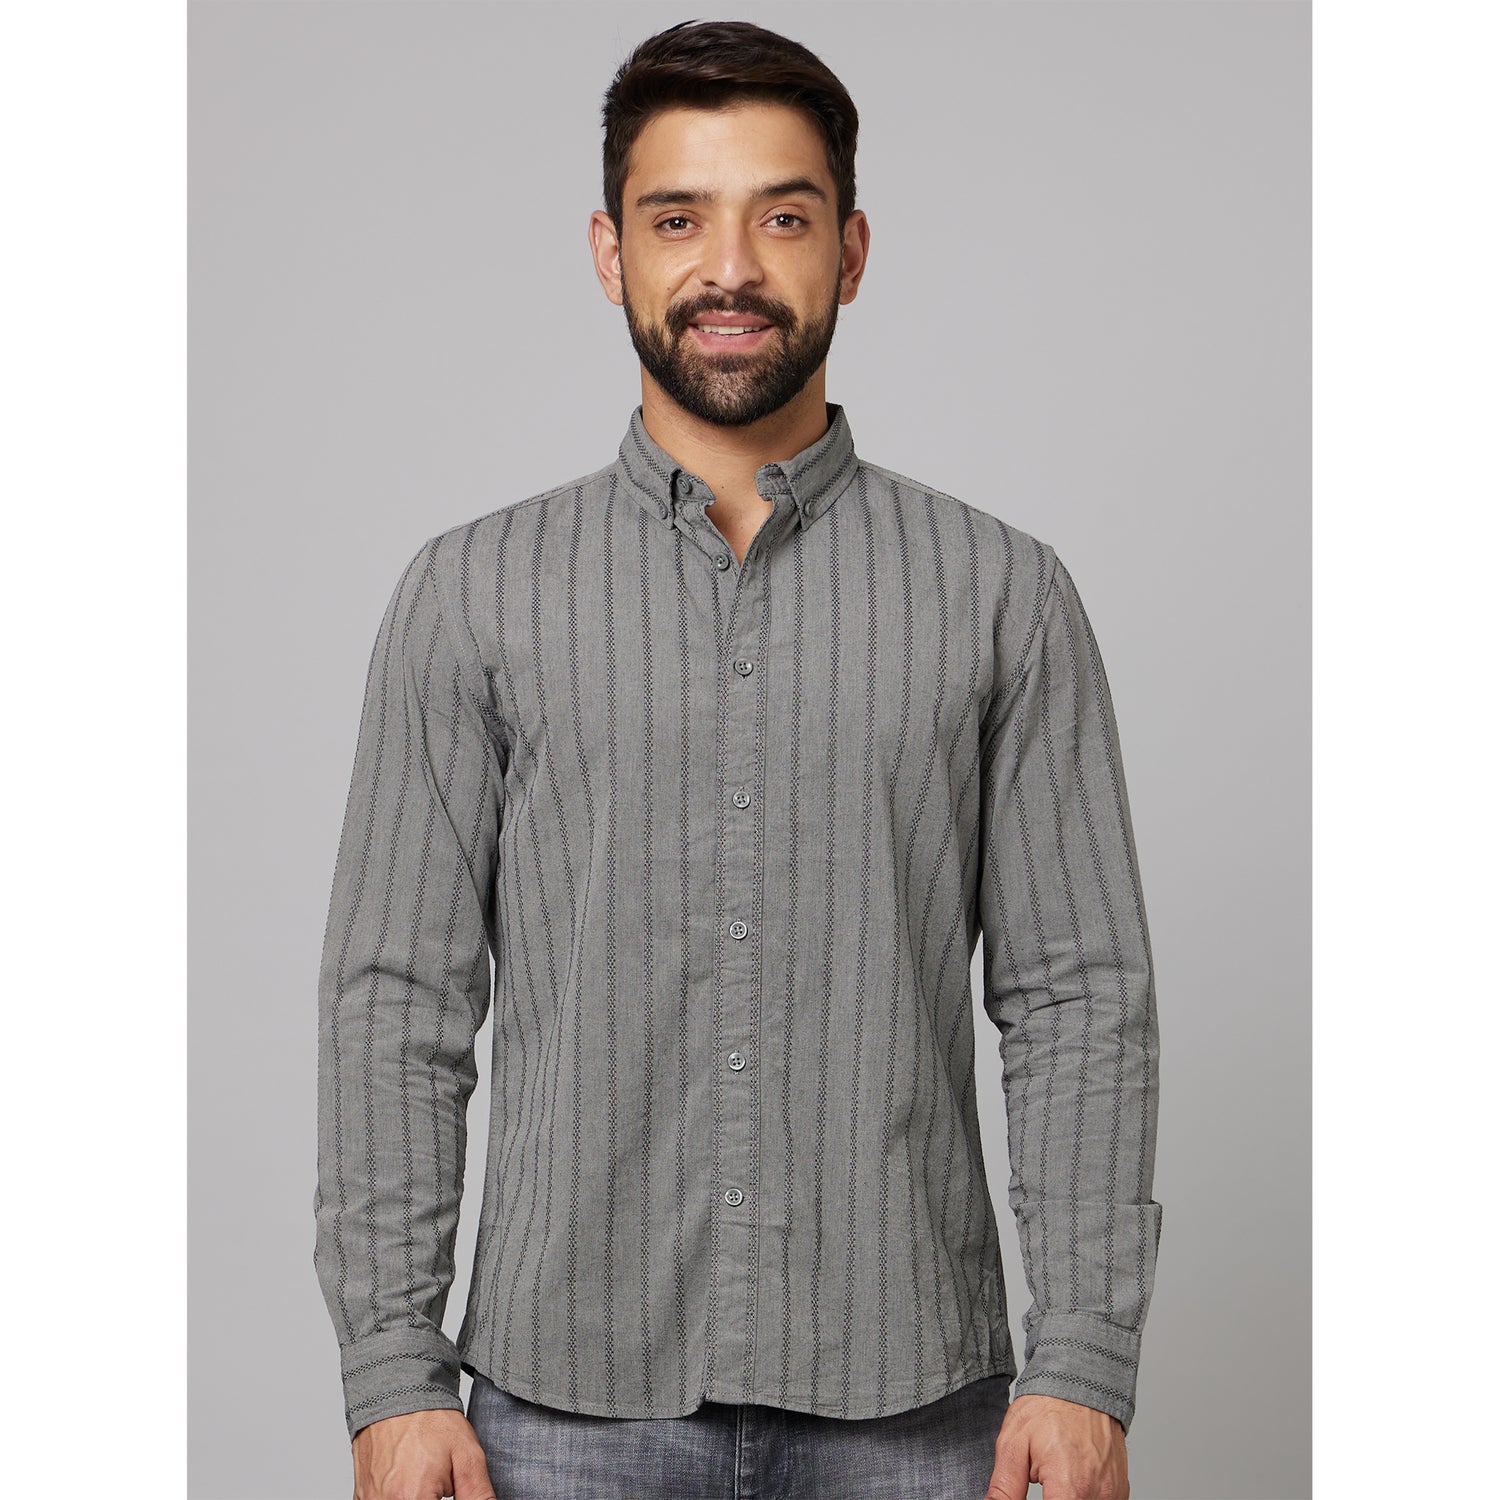 Grey Classic Fit Vertical Striped Button Down Collar Cotton Casual Shirt (DAJACLINE)